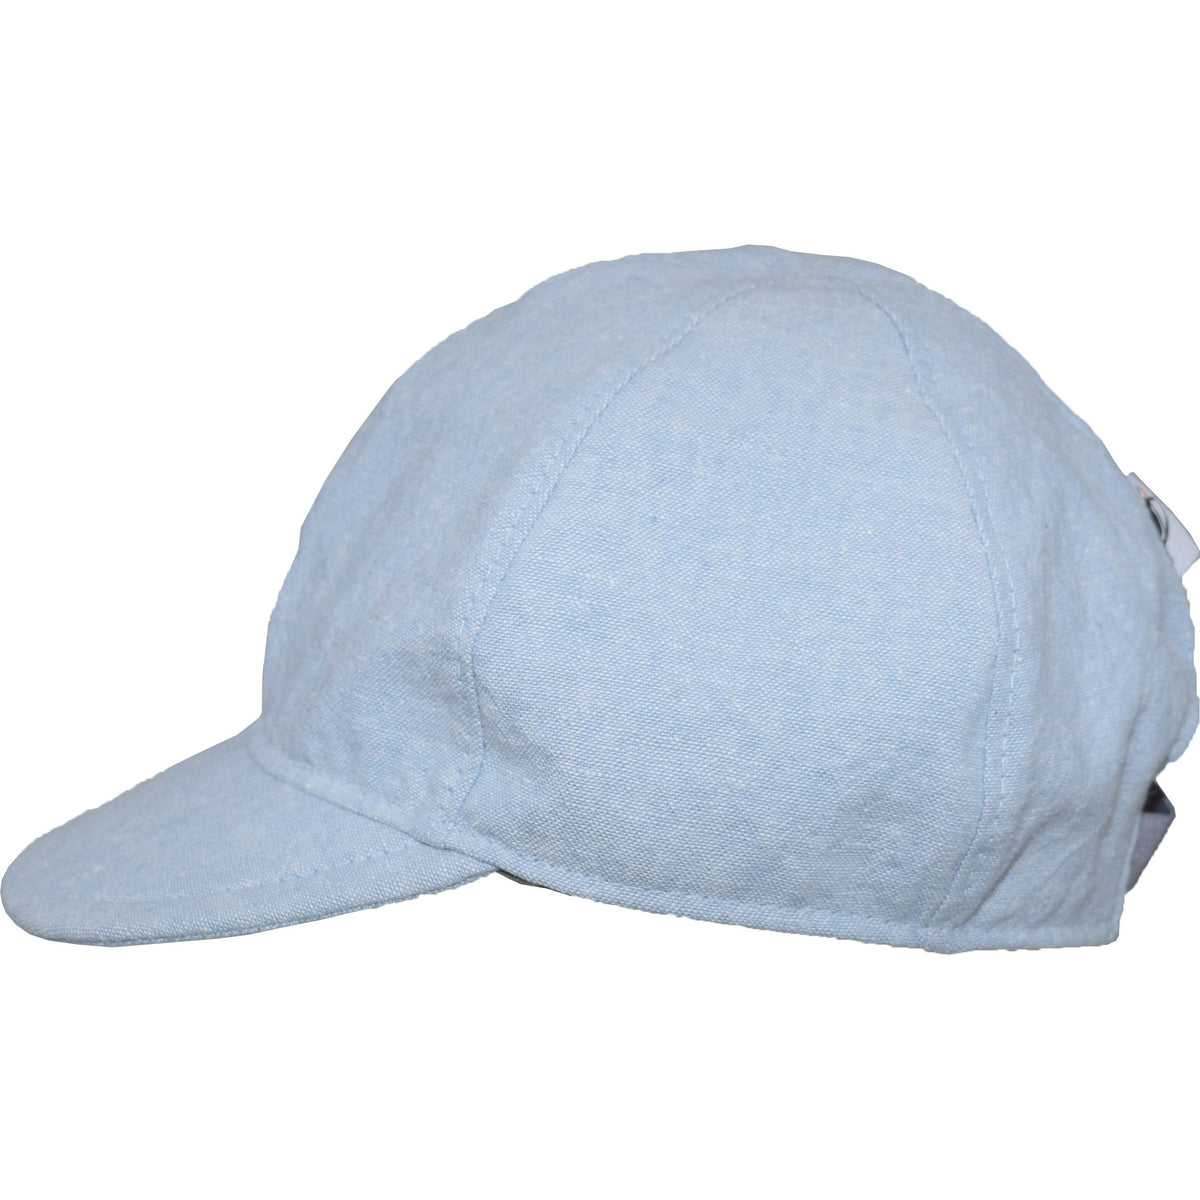 Kids Linen Canvas Ball Cap with UPF50 Sun Protection, Made in Canada by Puffin Gear-Faded Denim